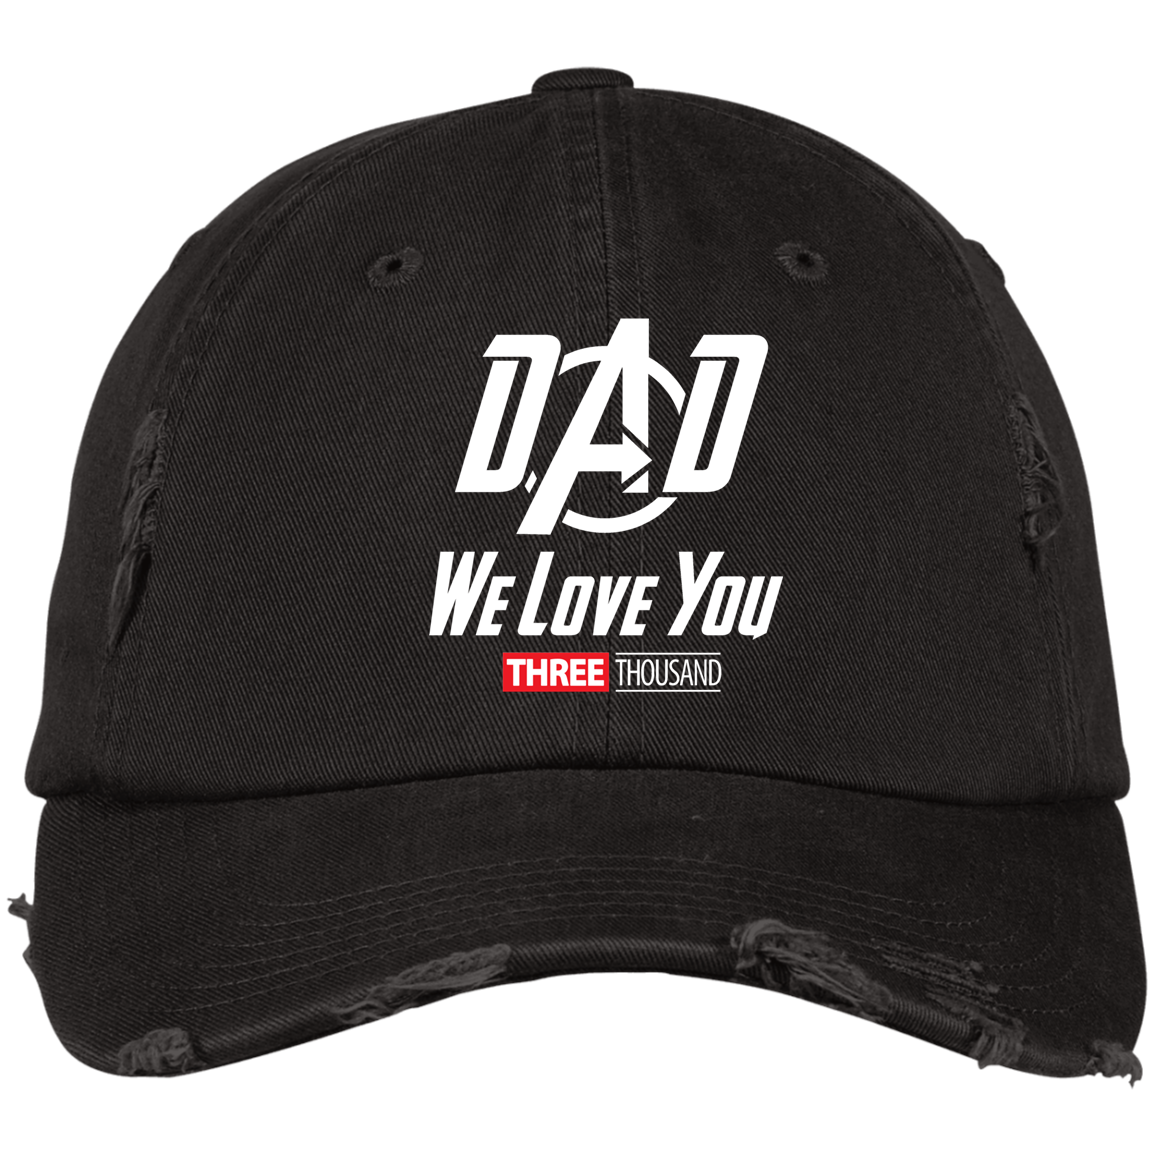 Dad We Love You Three Thousand - Embroidered Distressed Cap